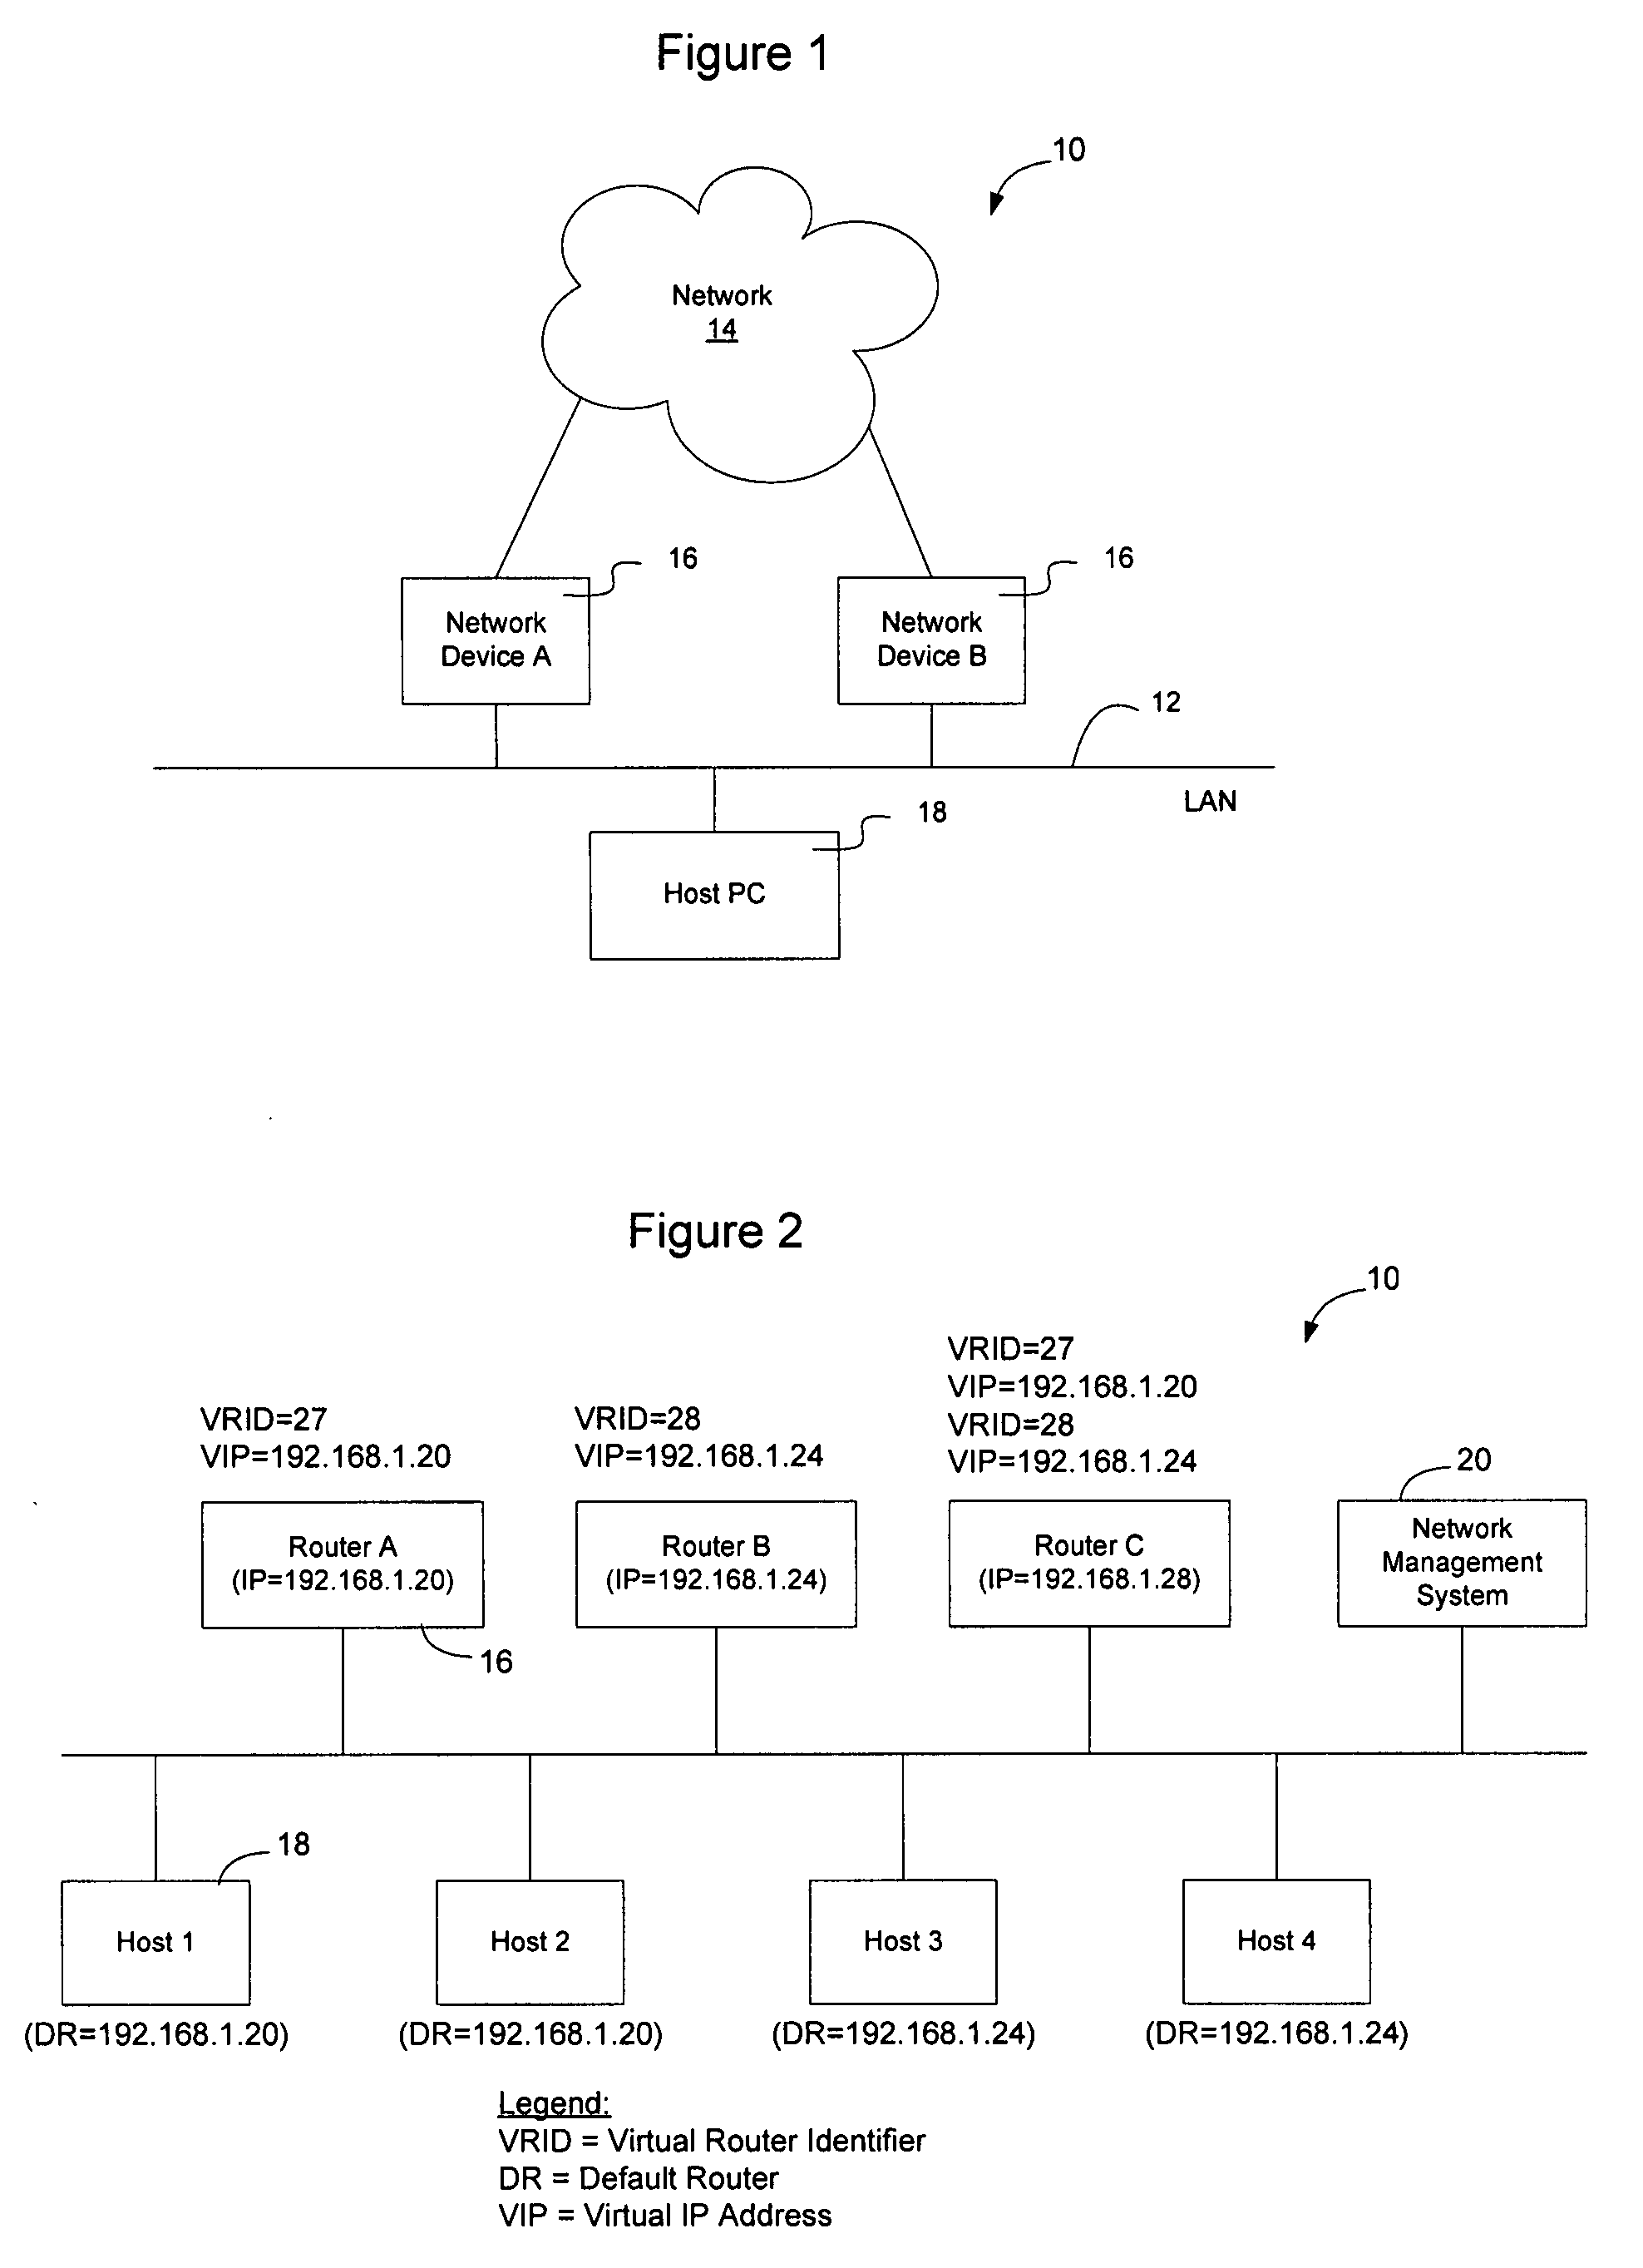 Method and apparatus for learning VRRP backup routers